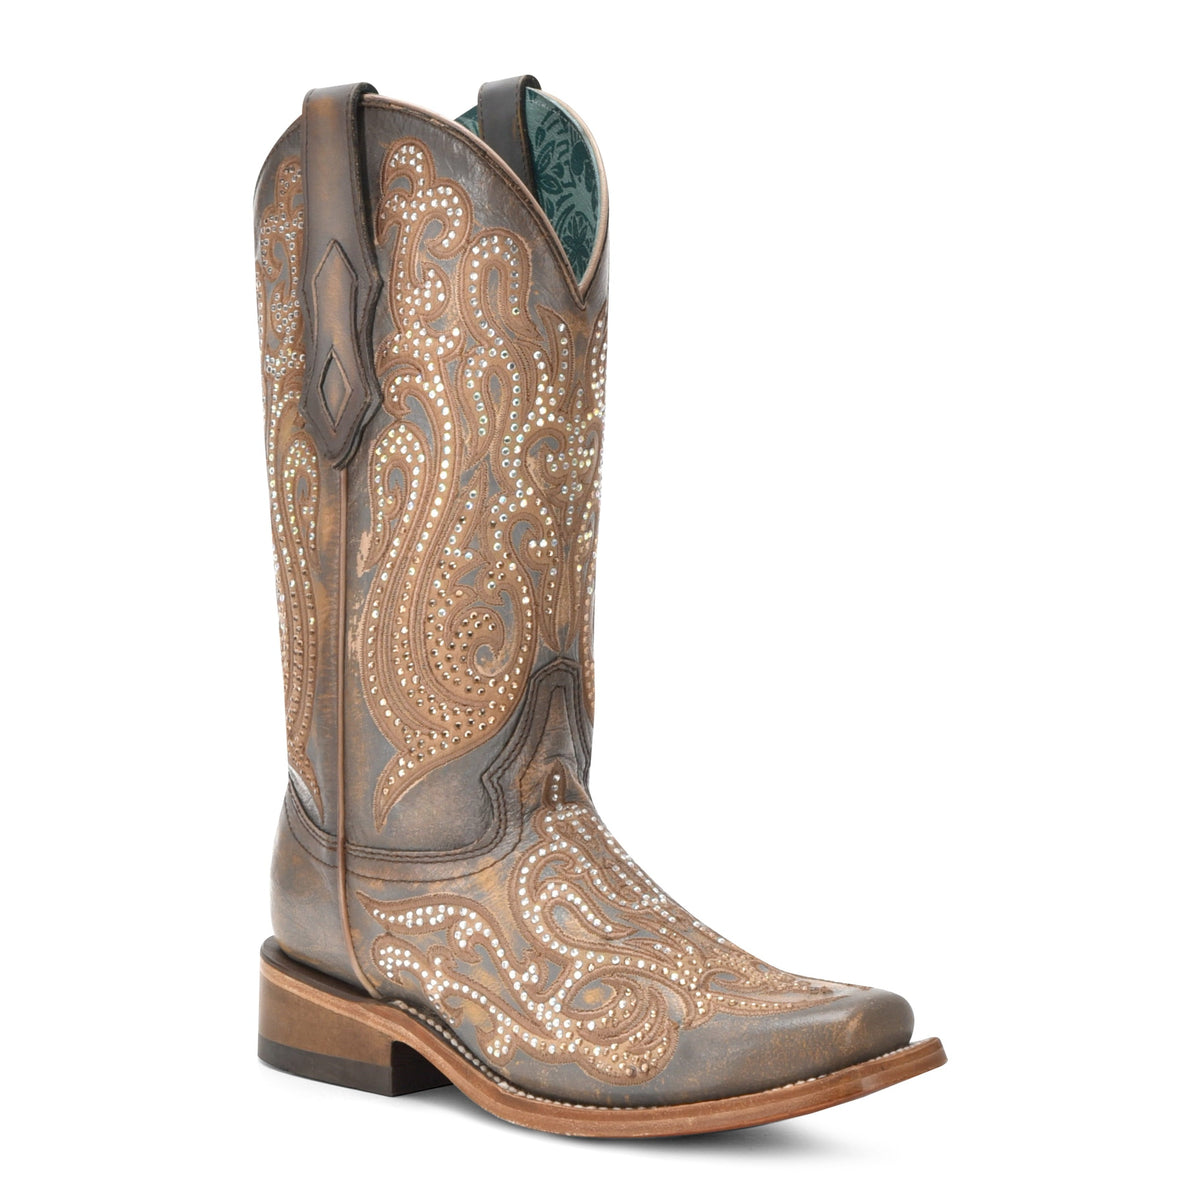 Corral Women's Distressed Grey-Honey Embroidery & Crystals Square Toe Western Boot